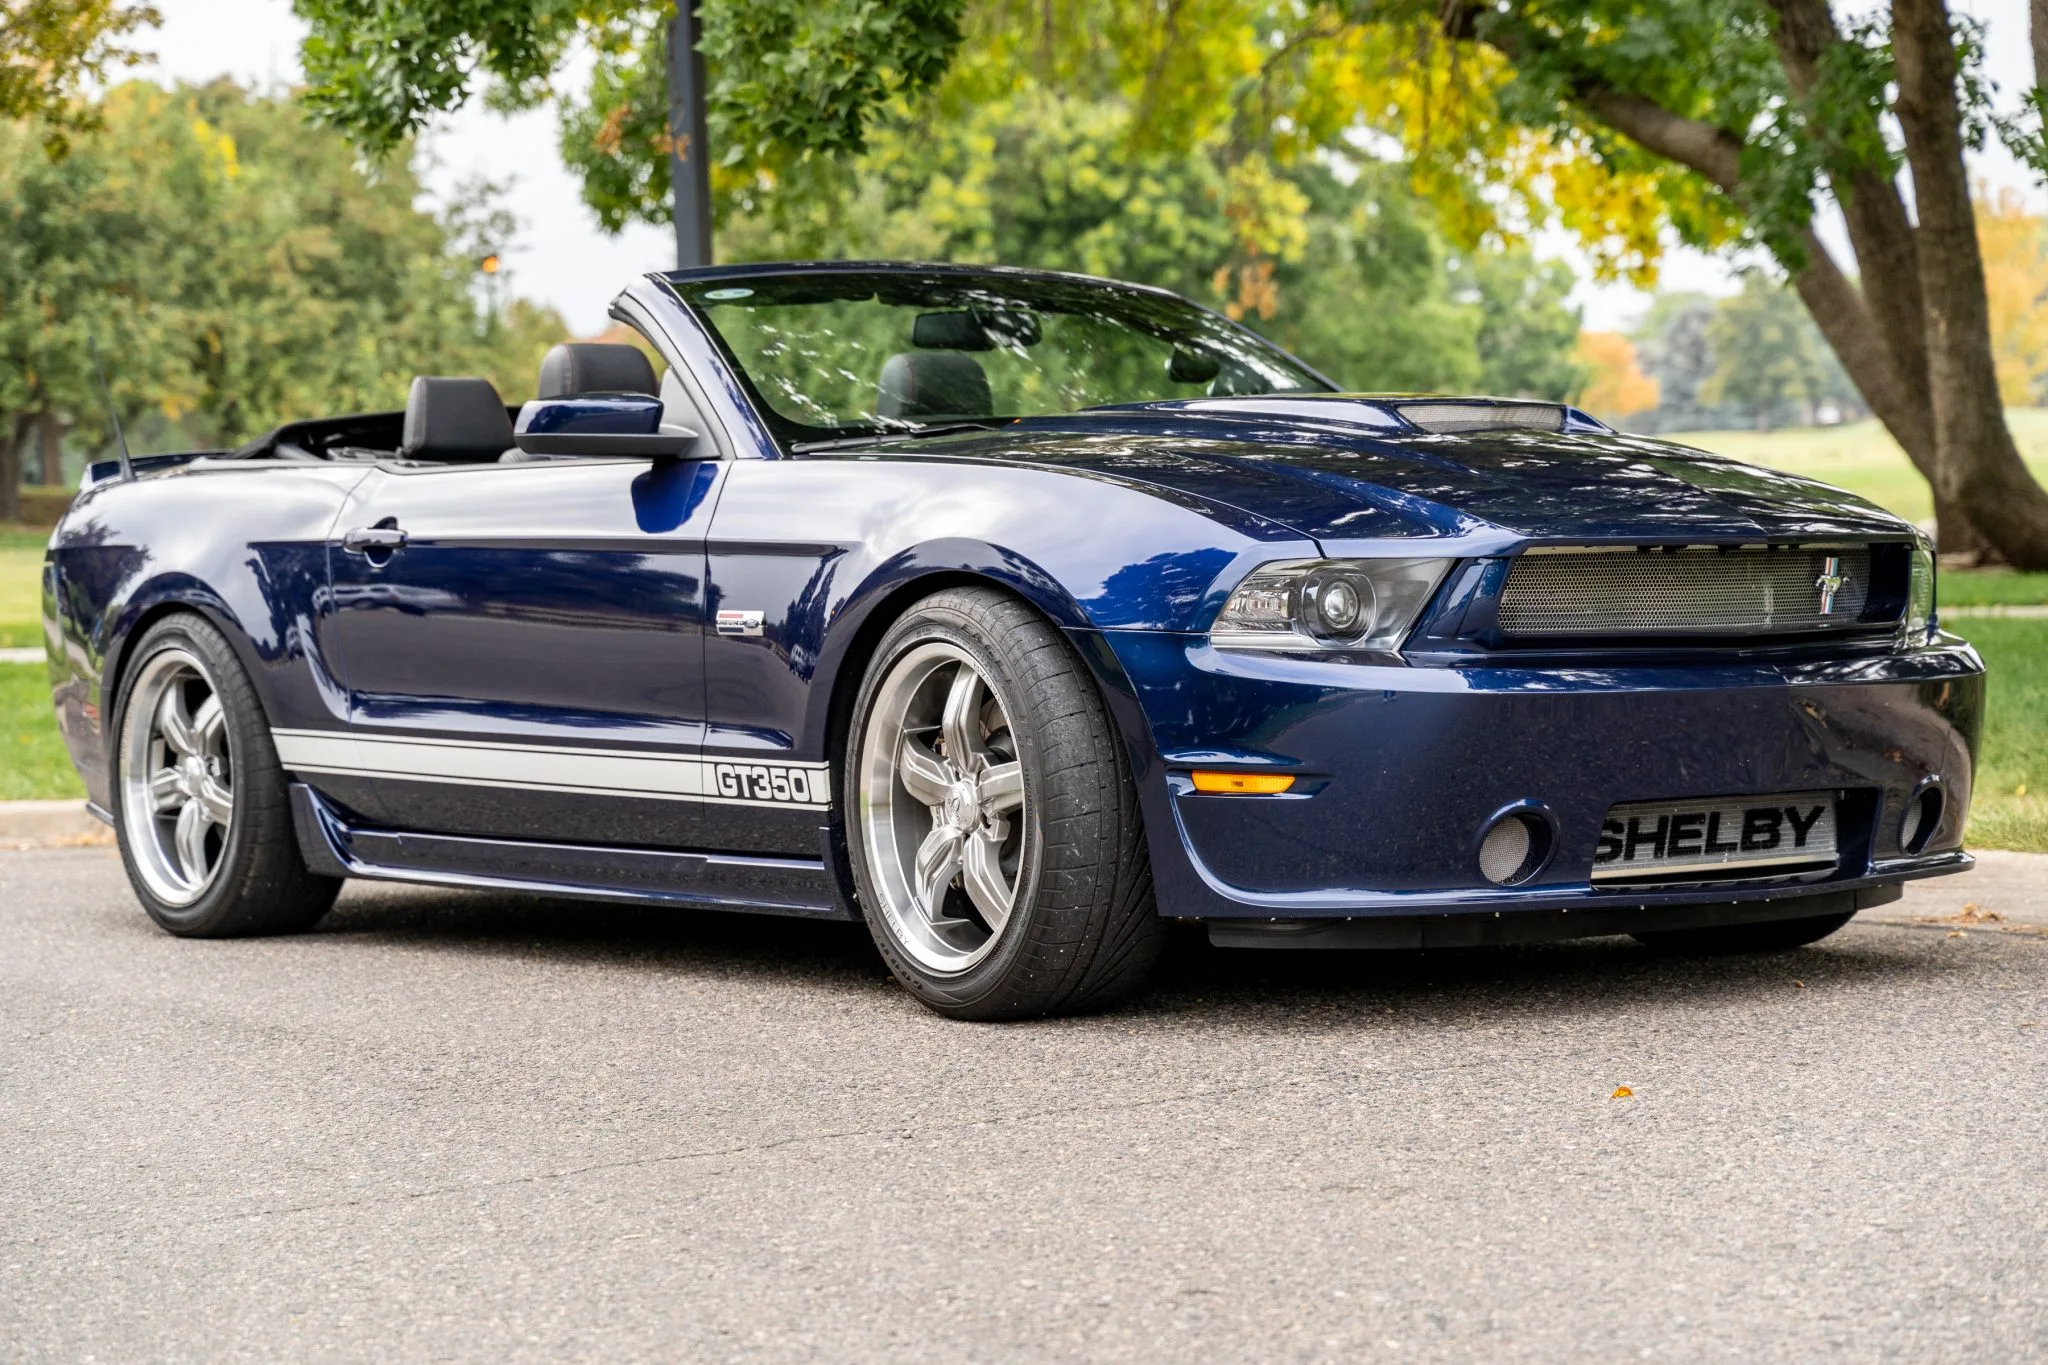 Mustang Of The Day: 2012 Ford Mustang Shelby GT350